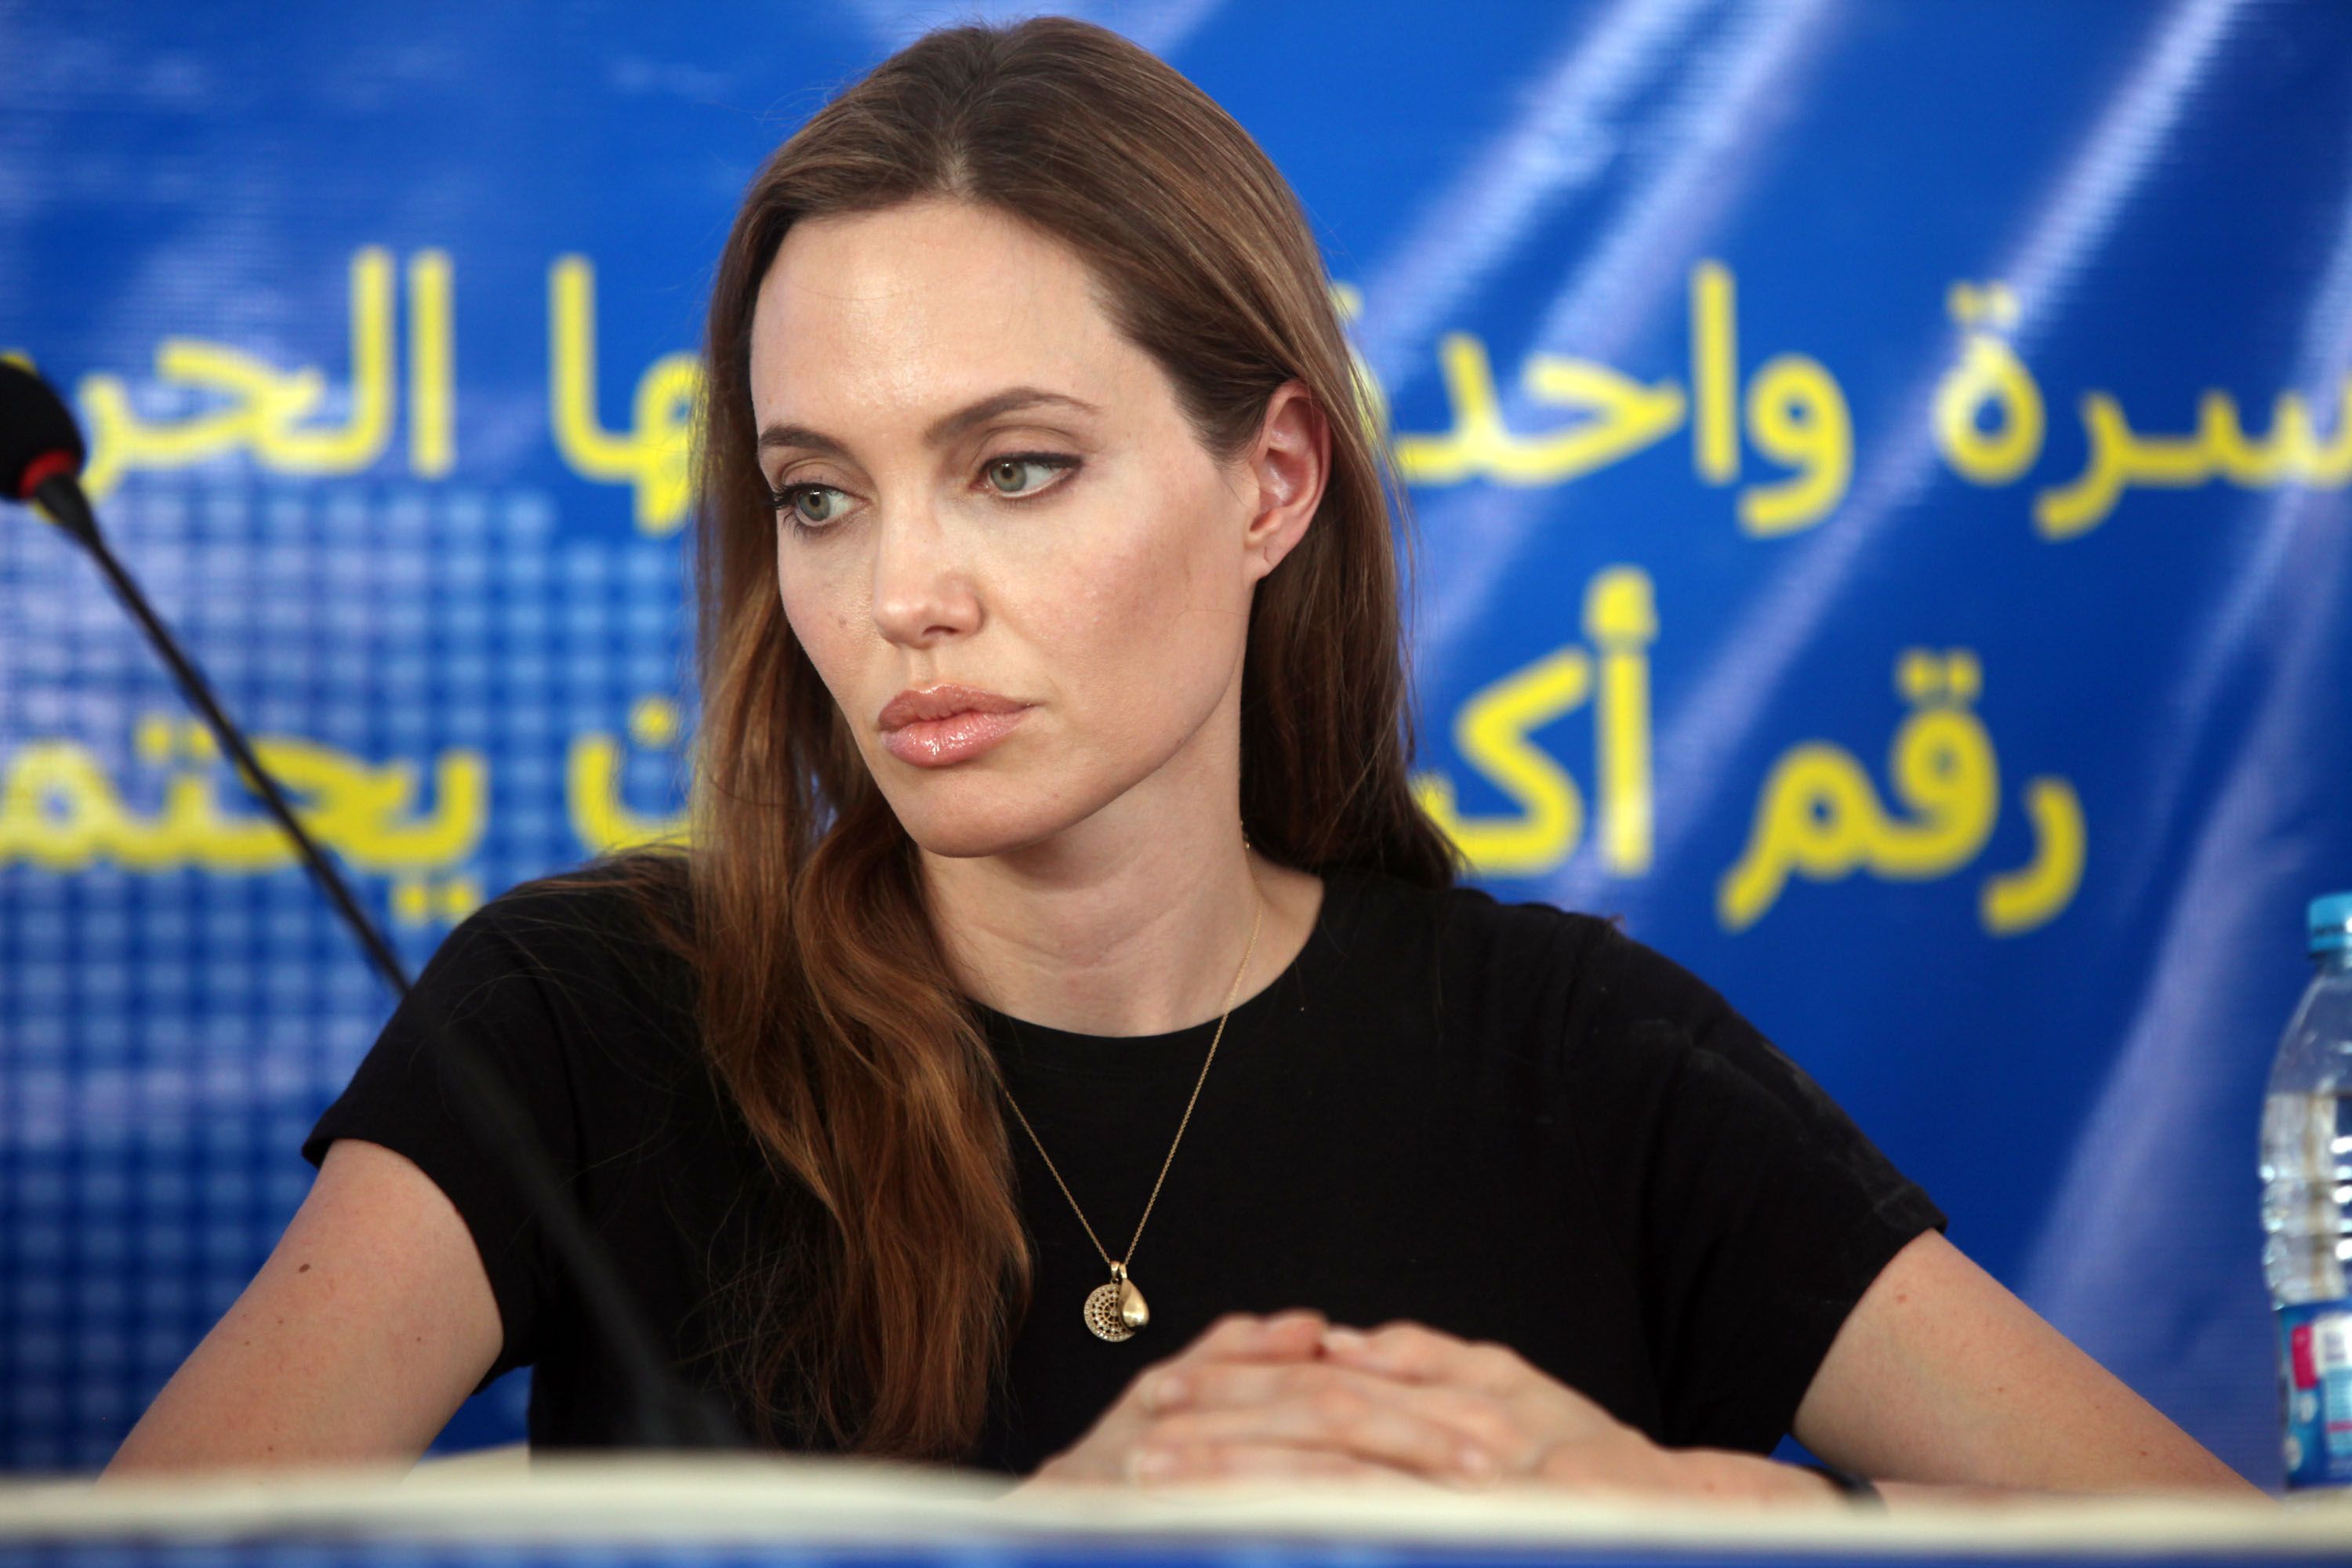 Angelina Jolie at a press conference to mark the World Refugee Day in Al-Zaatari Refugee Camp on June 20, 2013. | Photo: Getty Images